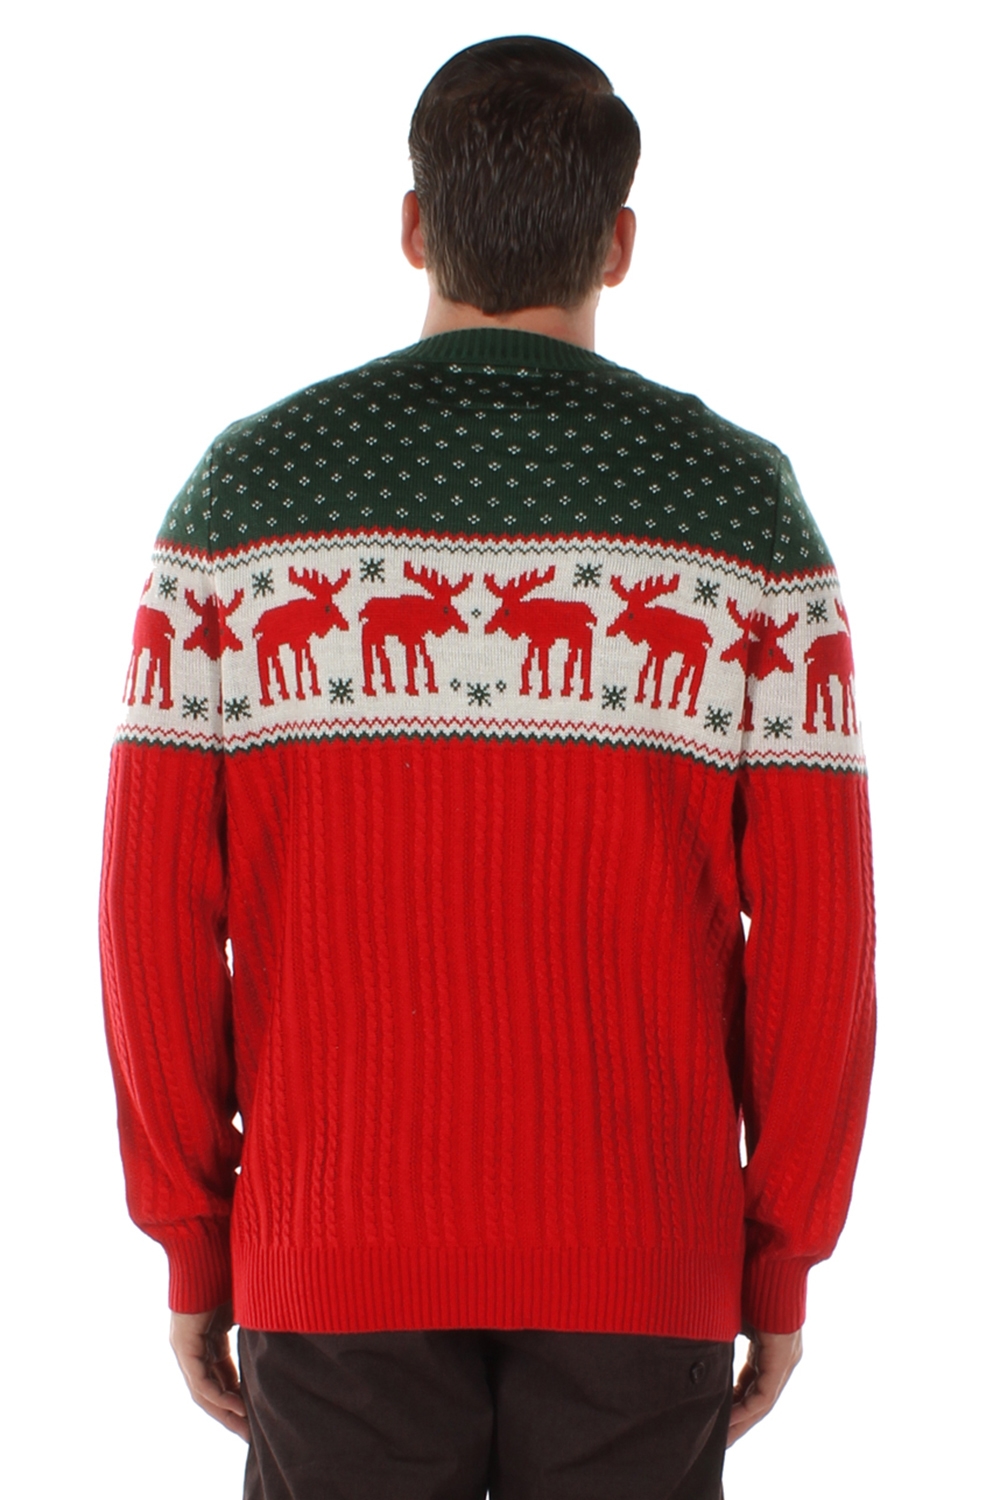 The Night Before Moose Christmas Sweater Image3